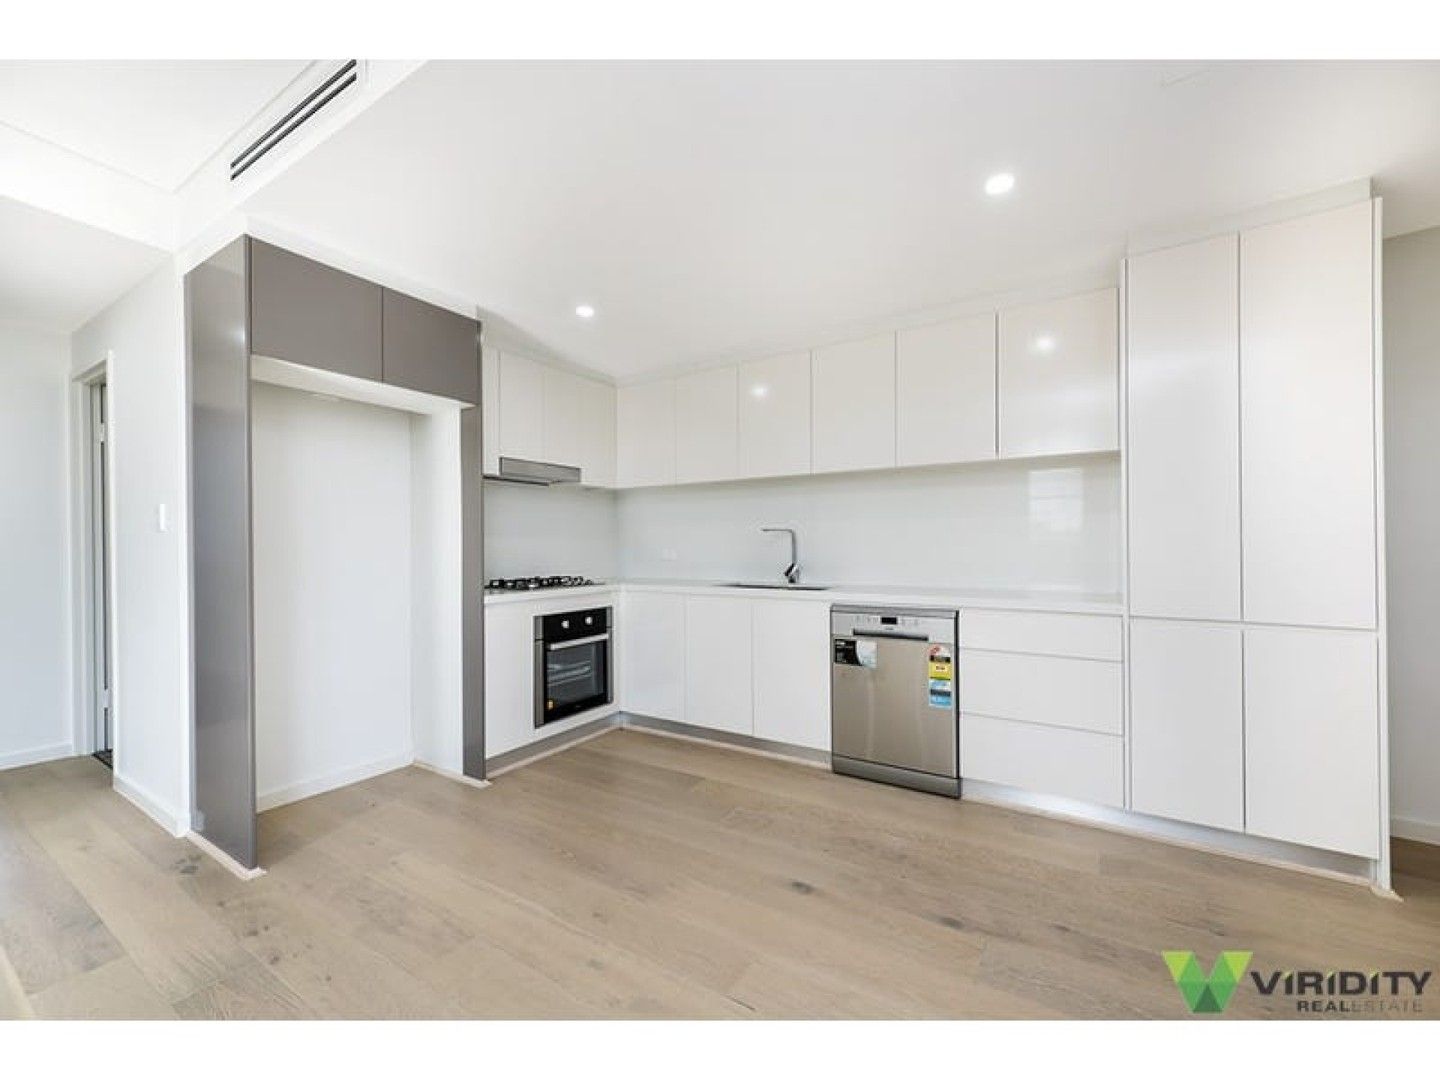 2 bedrooms Apartment / Unit / Flat in 501/507 President Avenue SUTHERLAND NSW, 2232